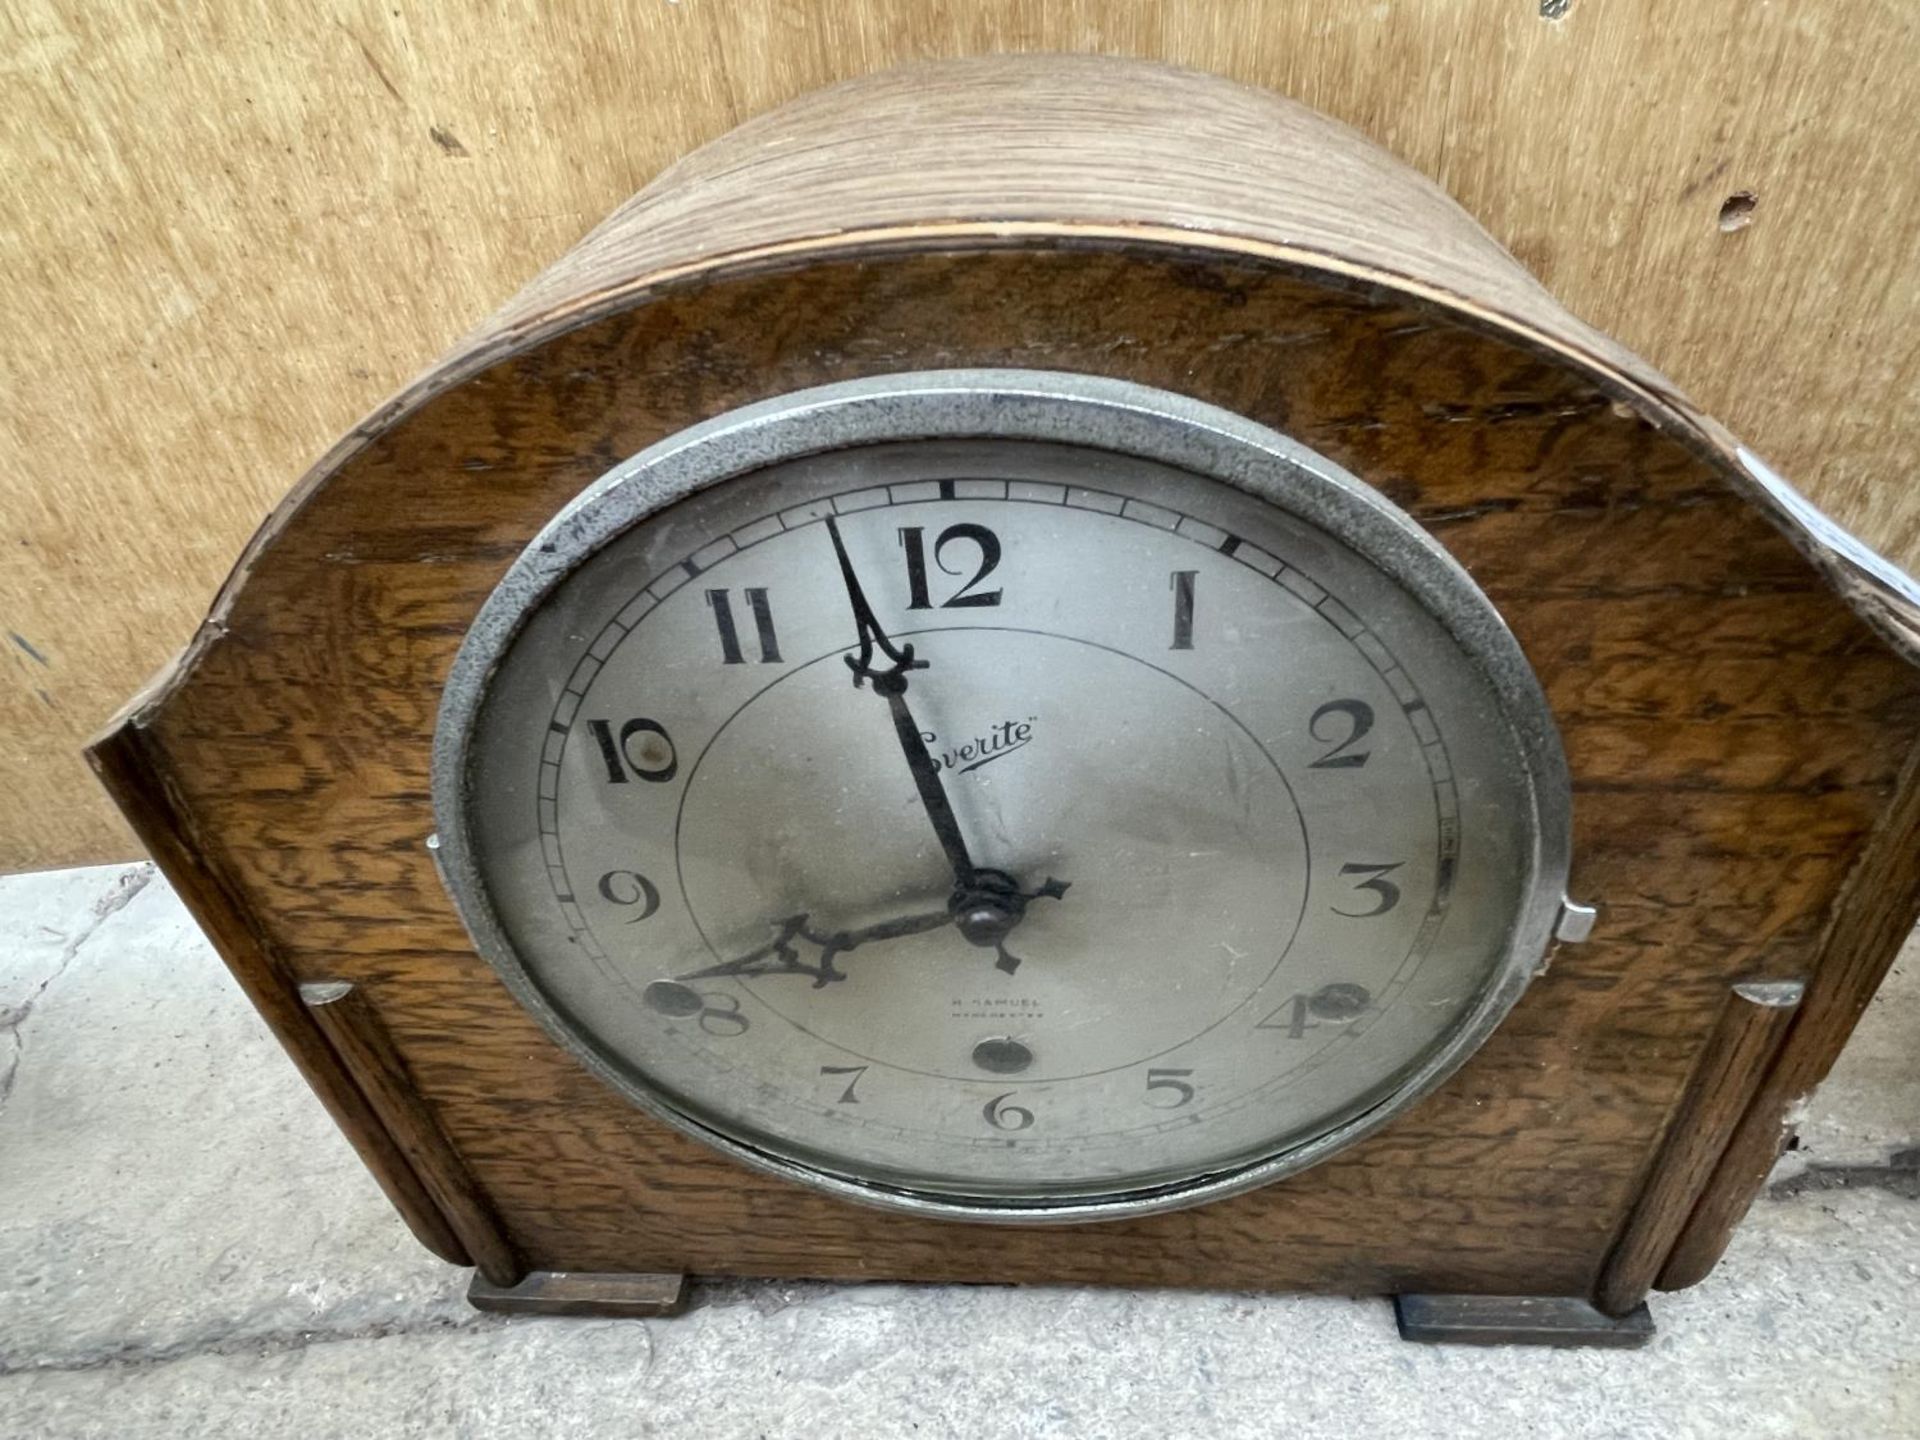 AN OAK CASED MANTLE CLOCK, VINTAGE TAPS AND A CAST PAN - Image 2 of 3